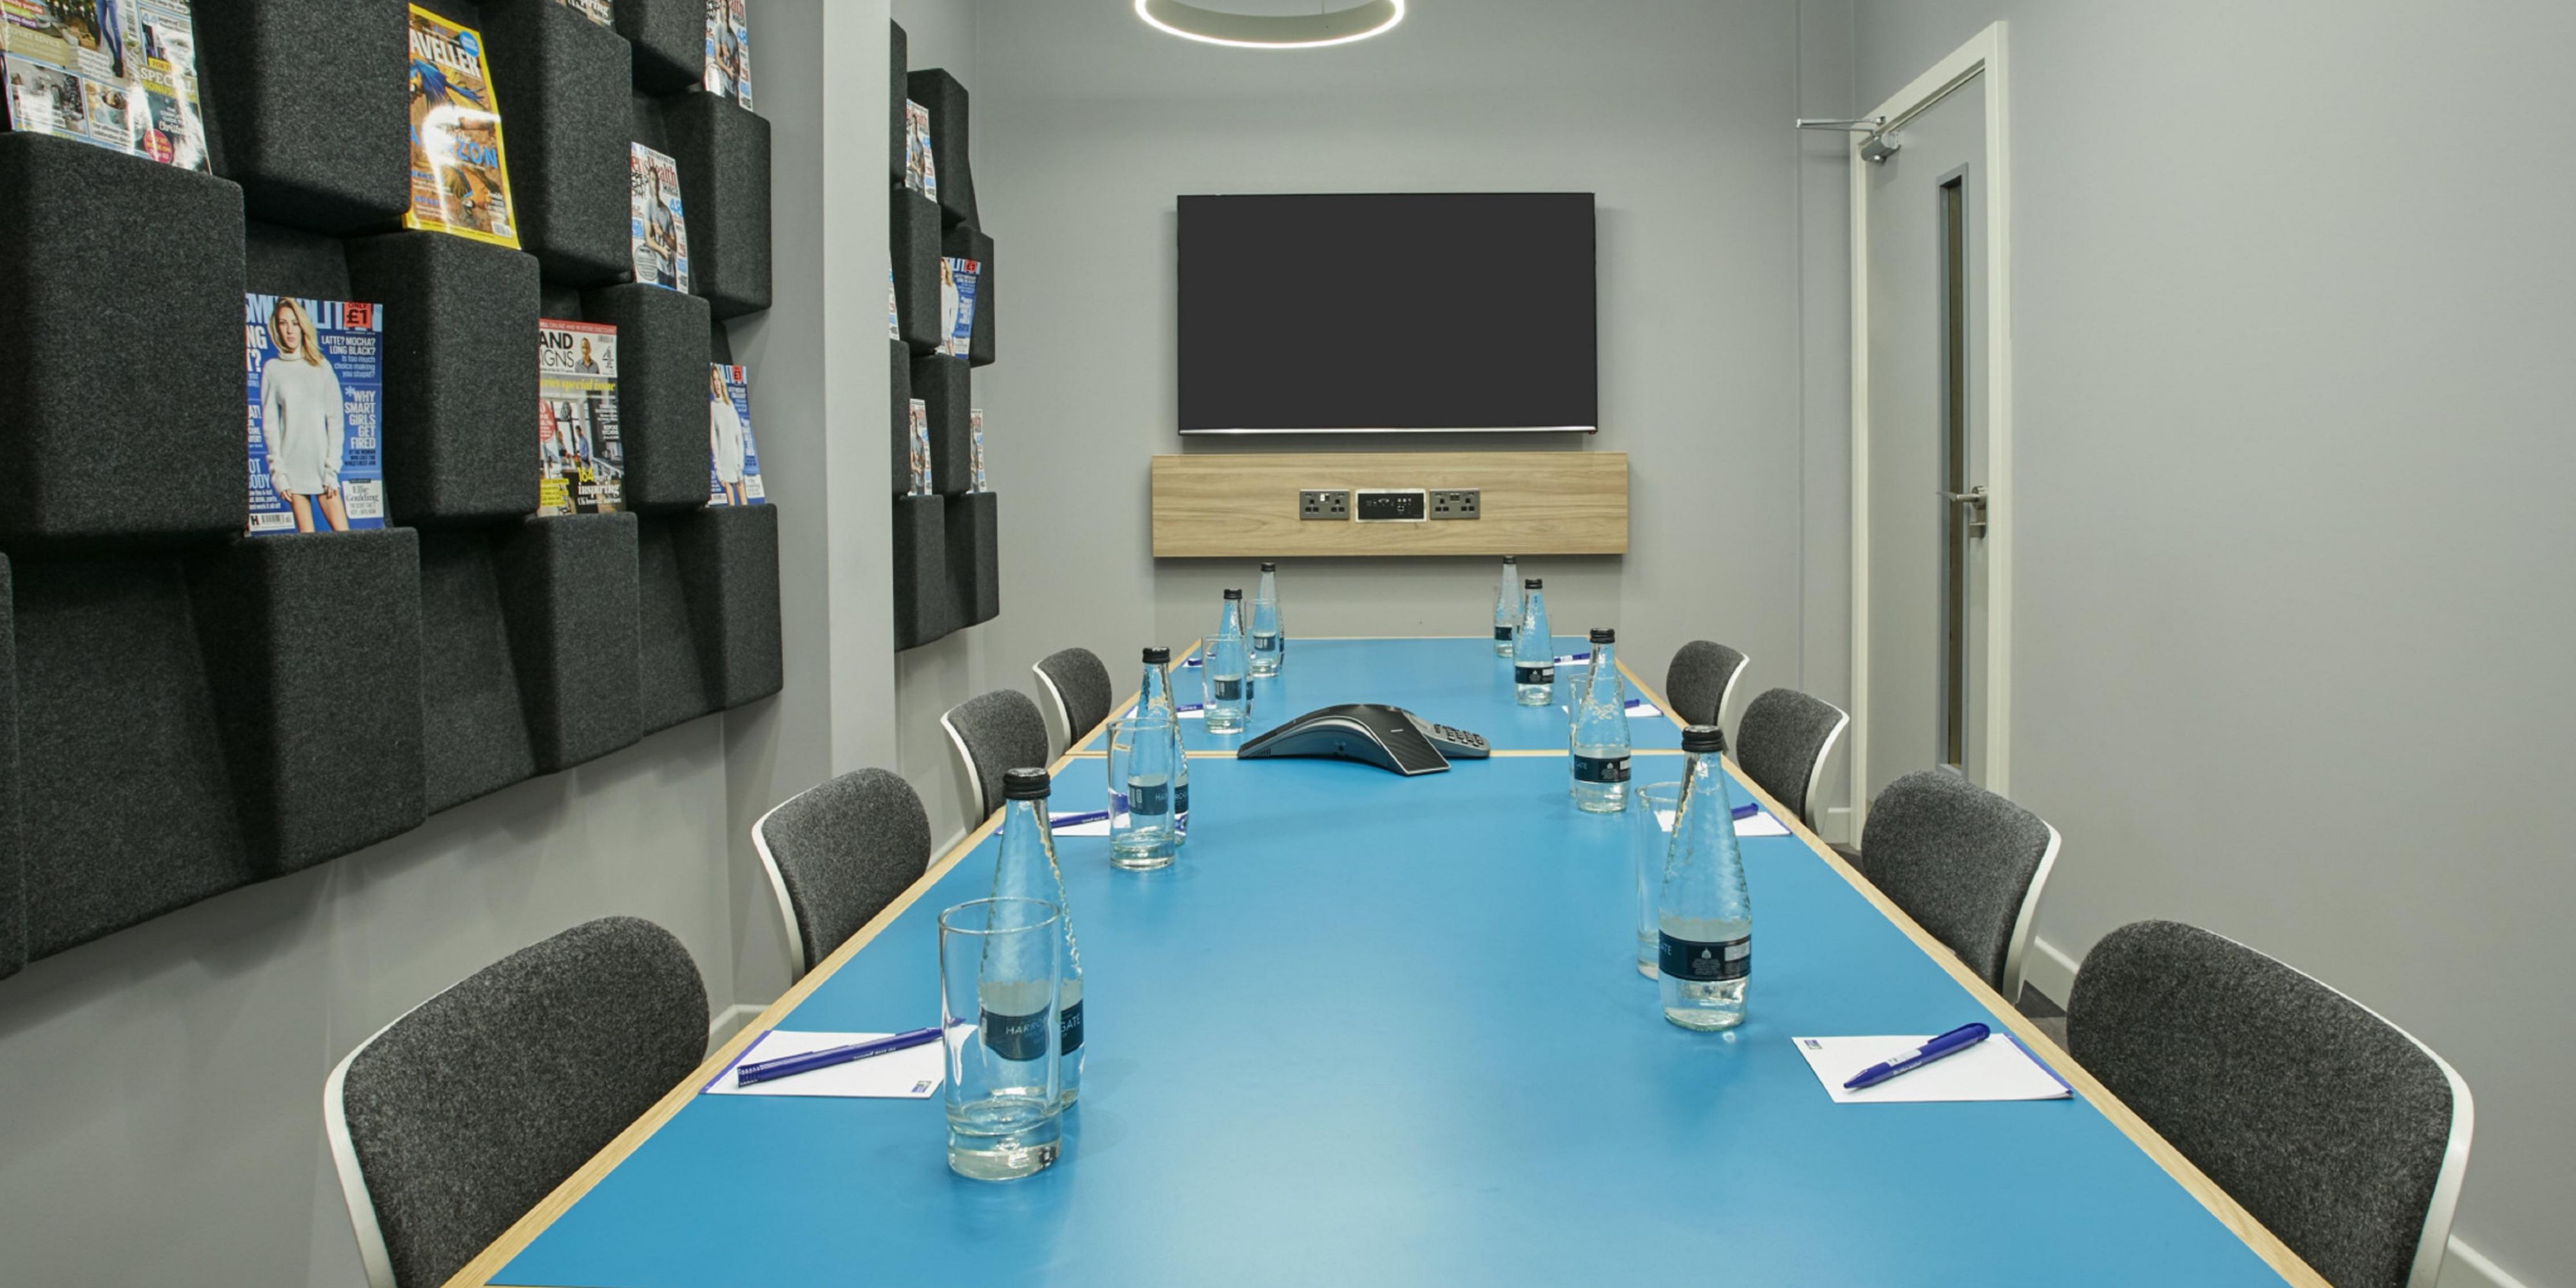 We have a total of three meeting rooms capable of seating 10-24 people, along with integrated screens, free Wi-Fi, and menu items designed for groups. We also offer an unlimited supply of tea and coffee that’s just what you need to start off your meeting.